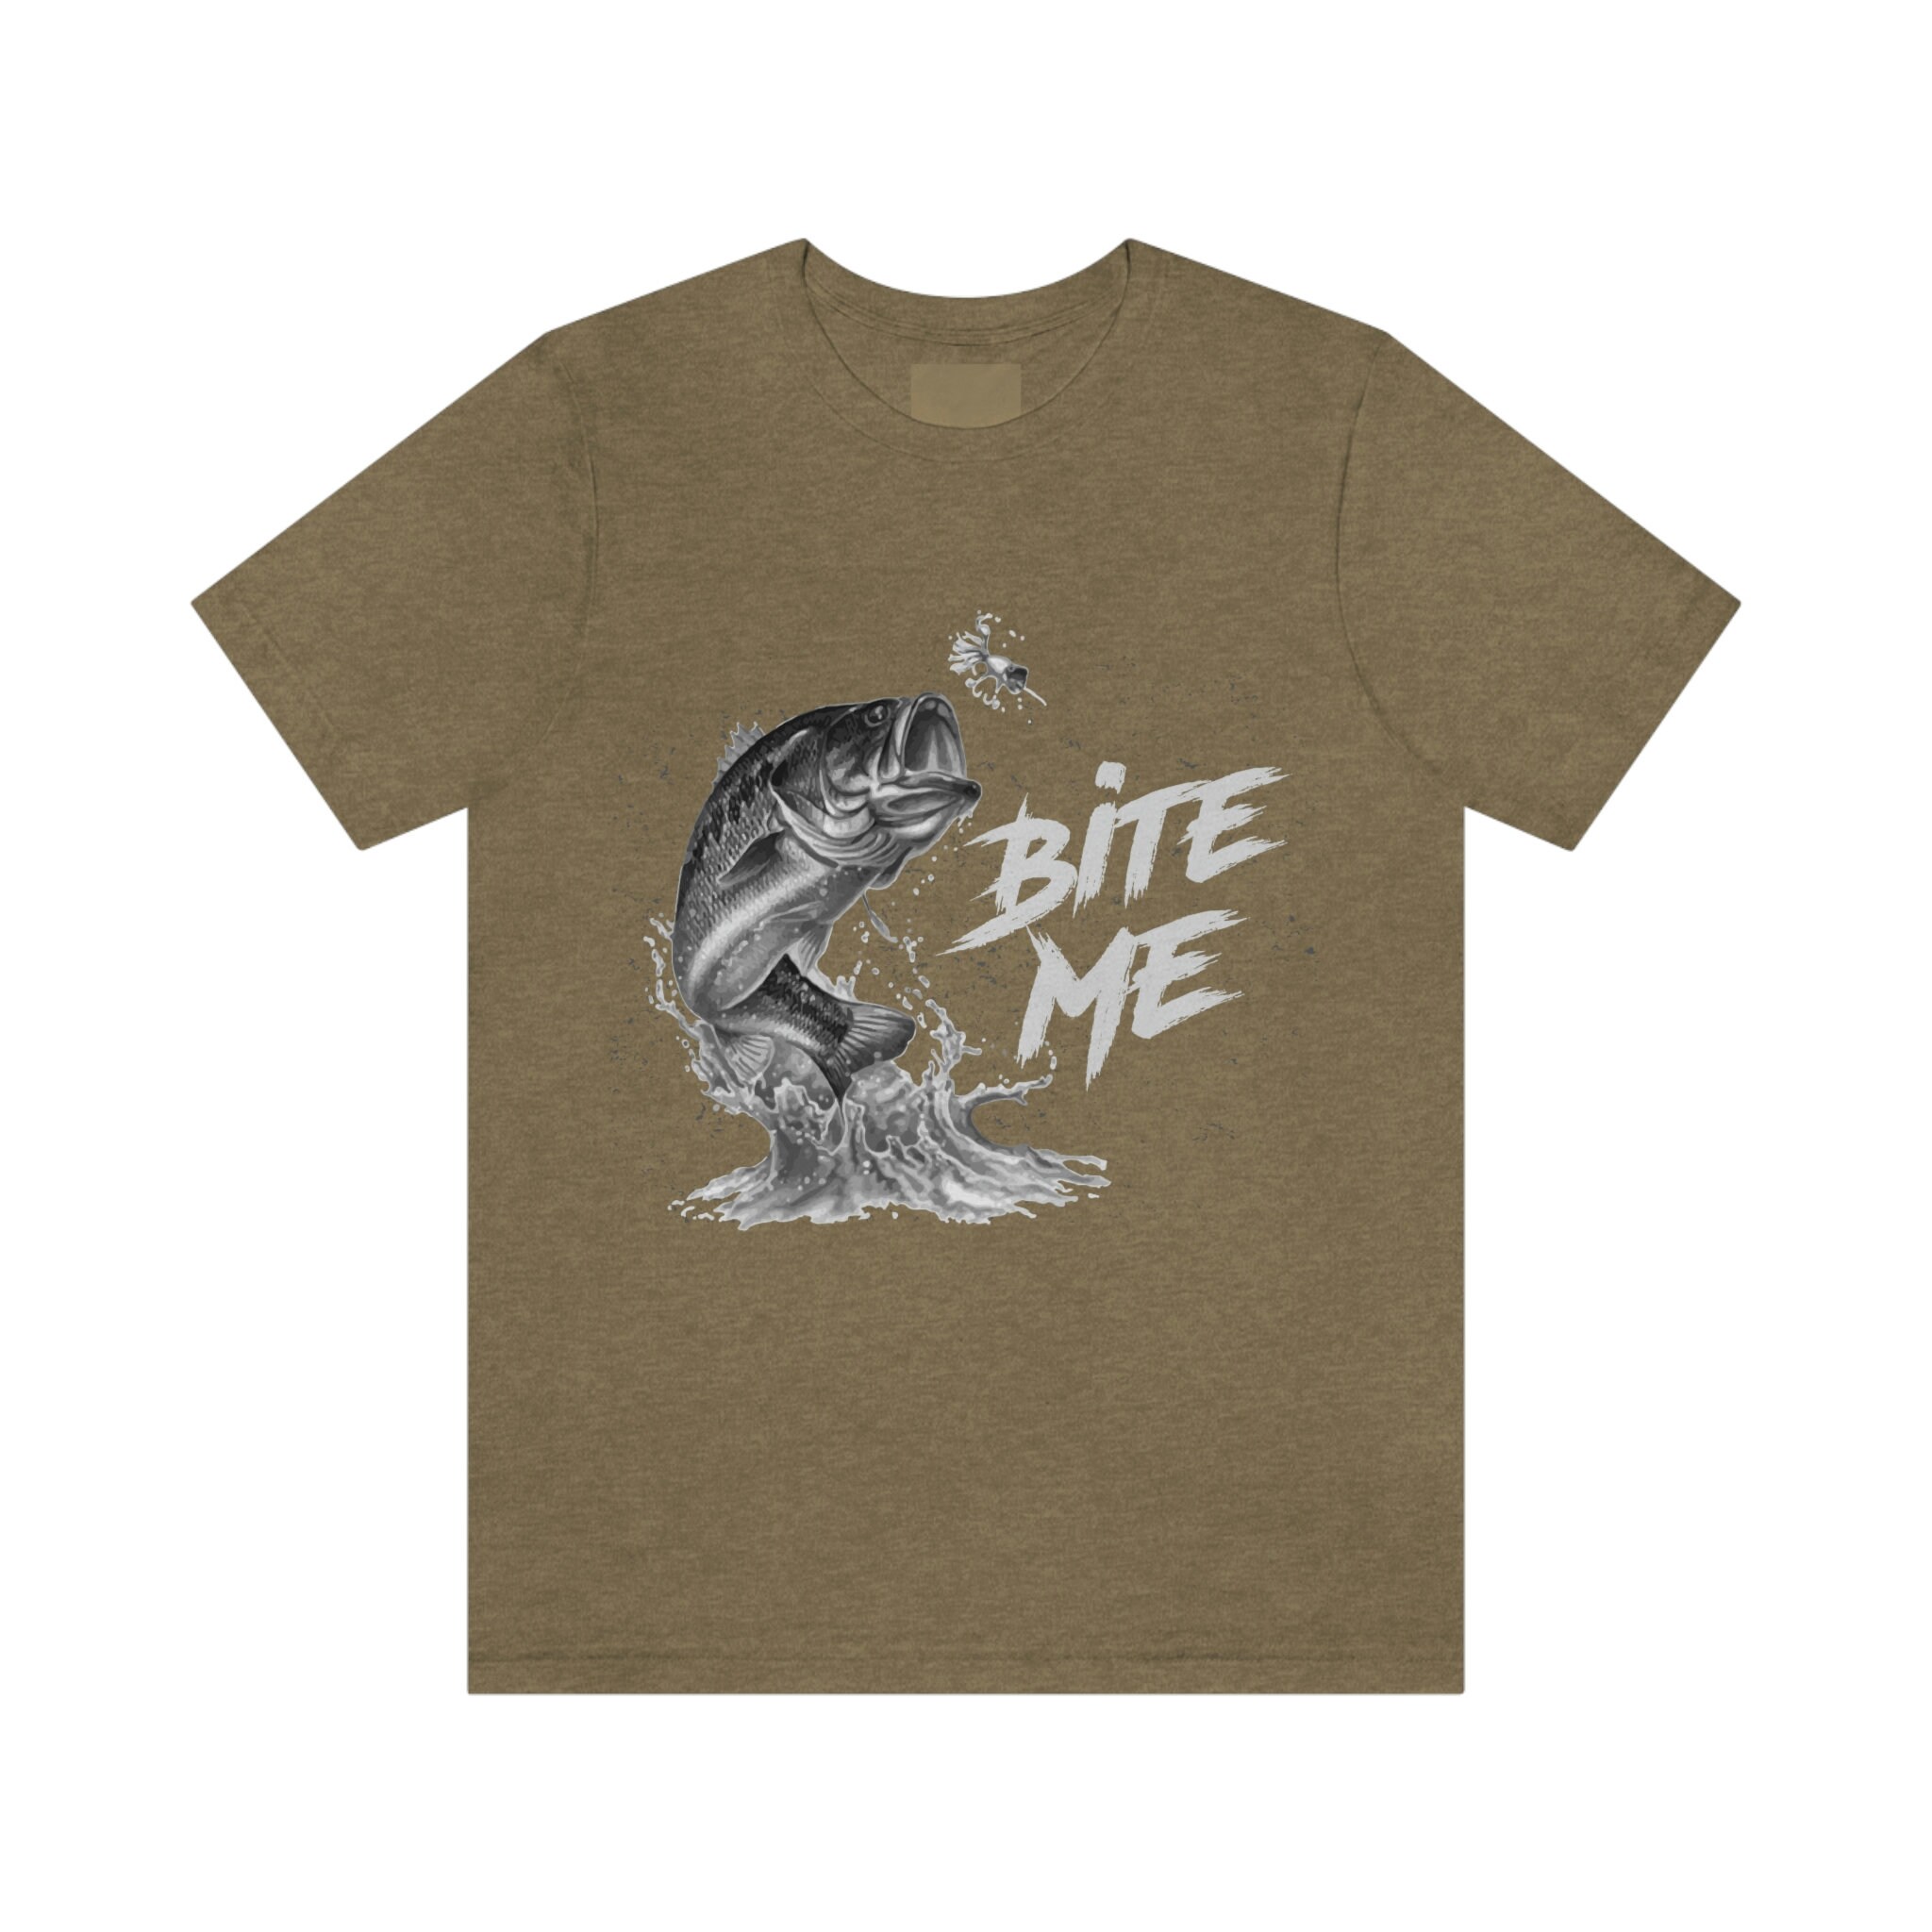 Bite Me Fish T-shirt, Funny Fishing Tee, Angler's Gift, Catch of